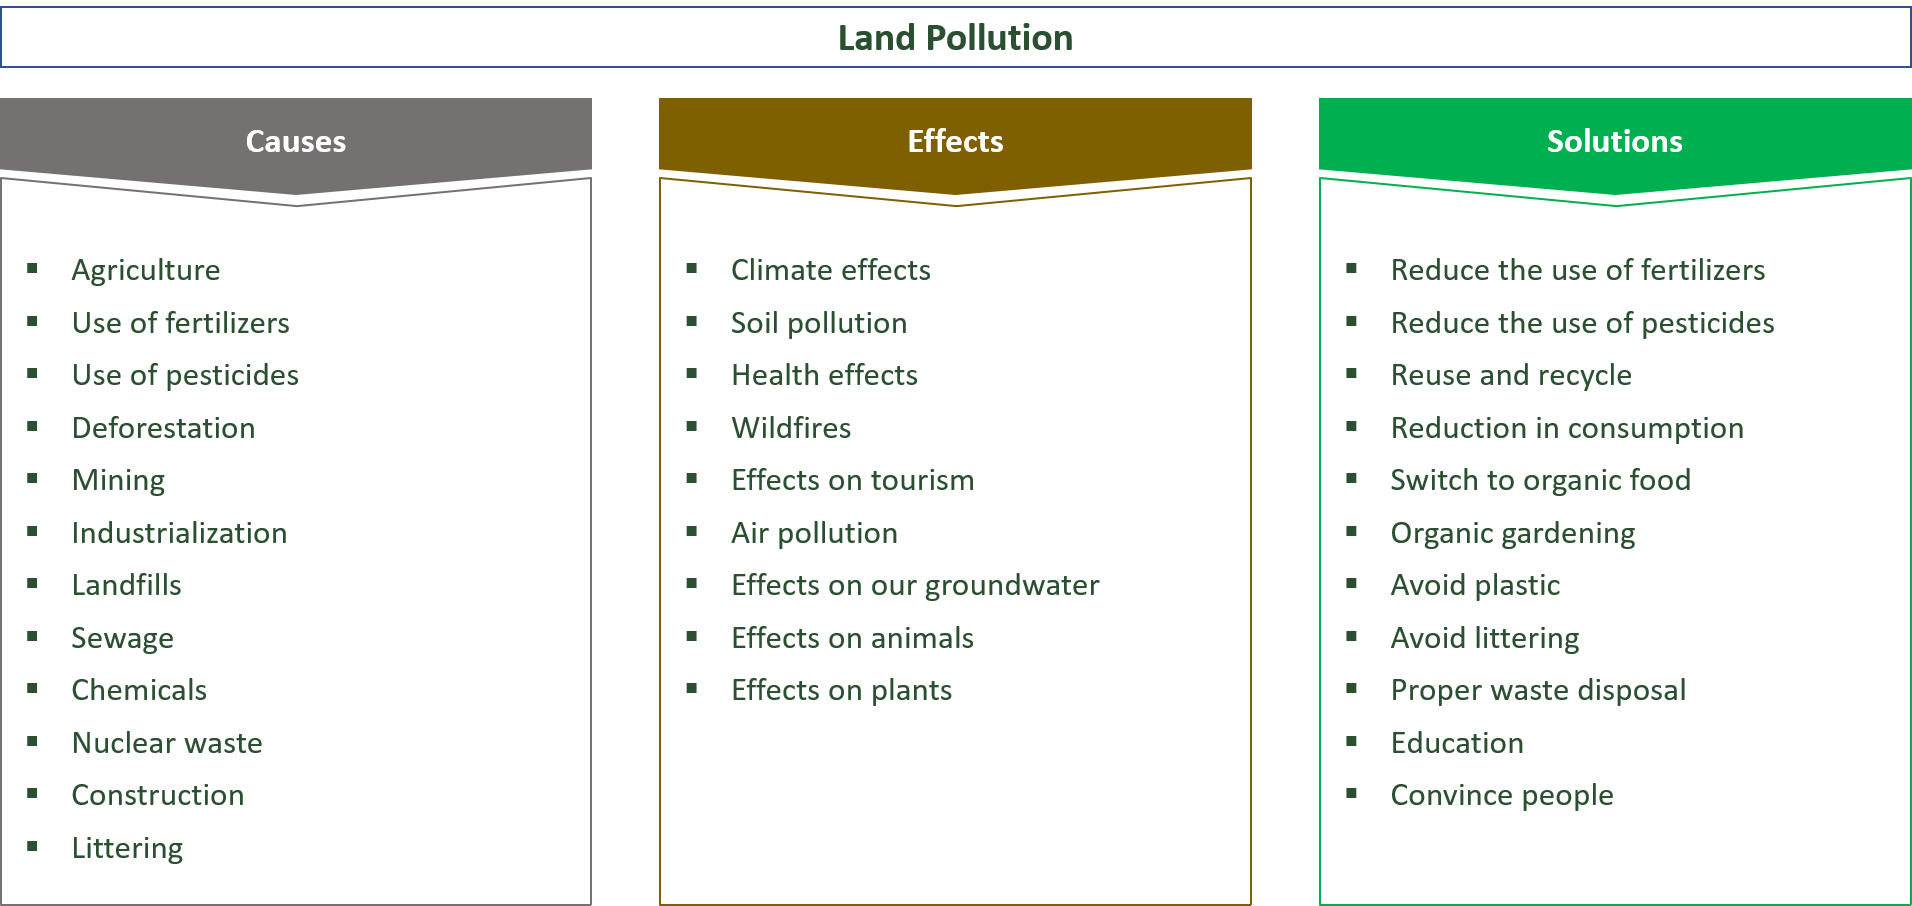 various causes, effects and solutions for land pollution